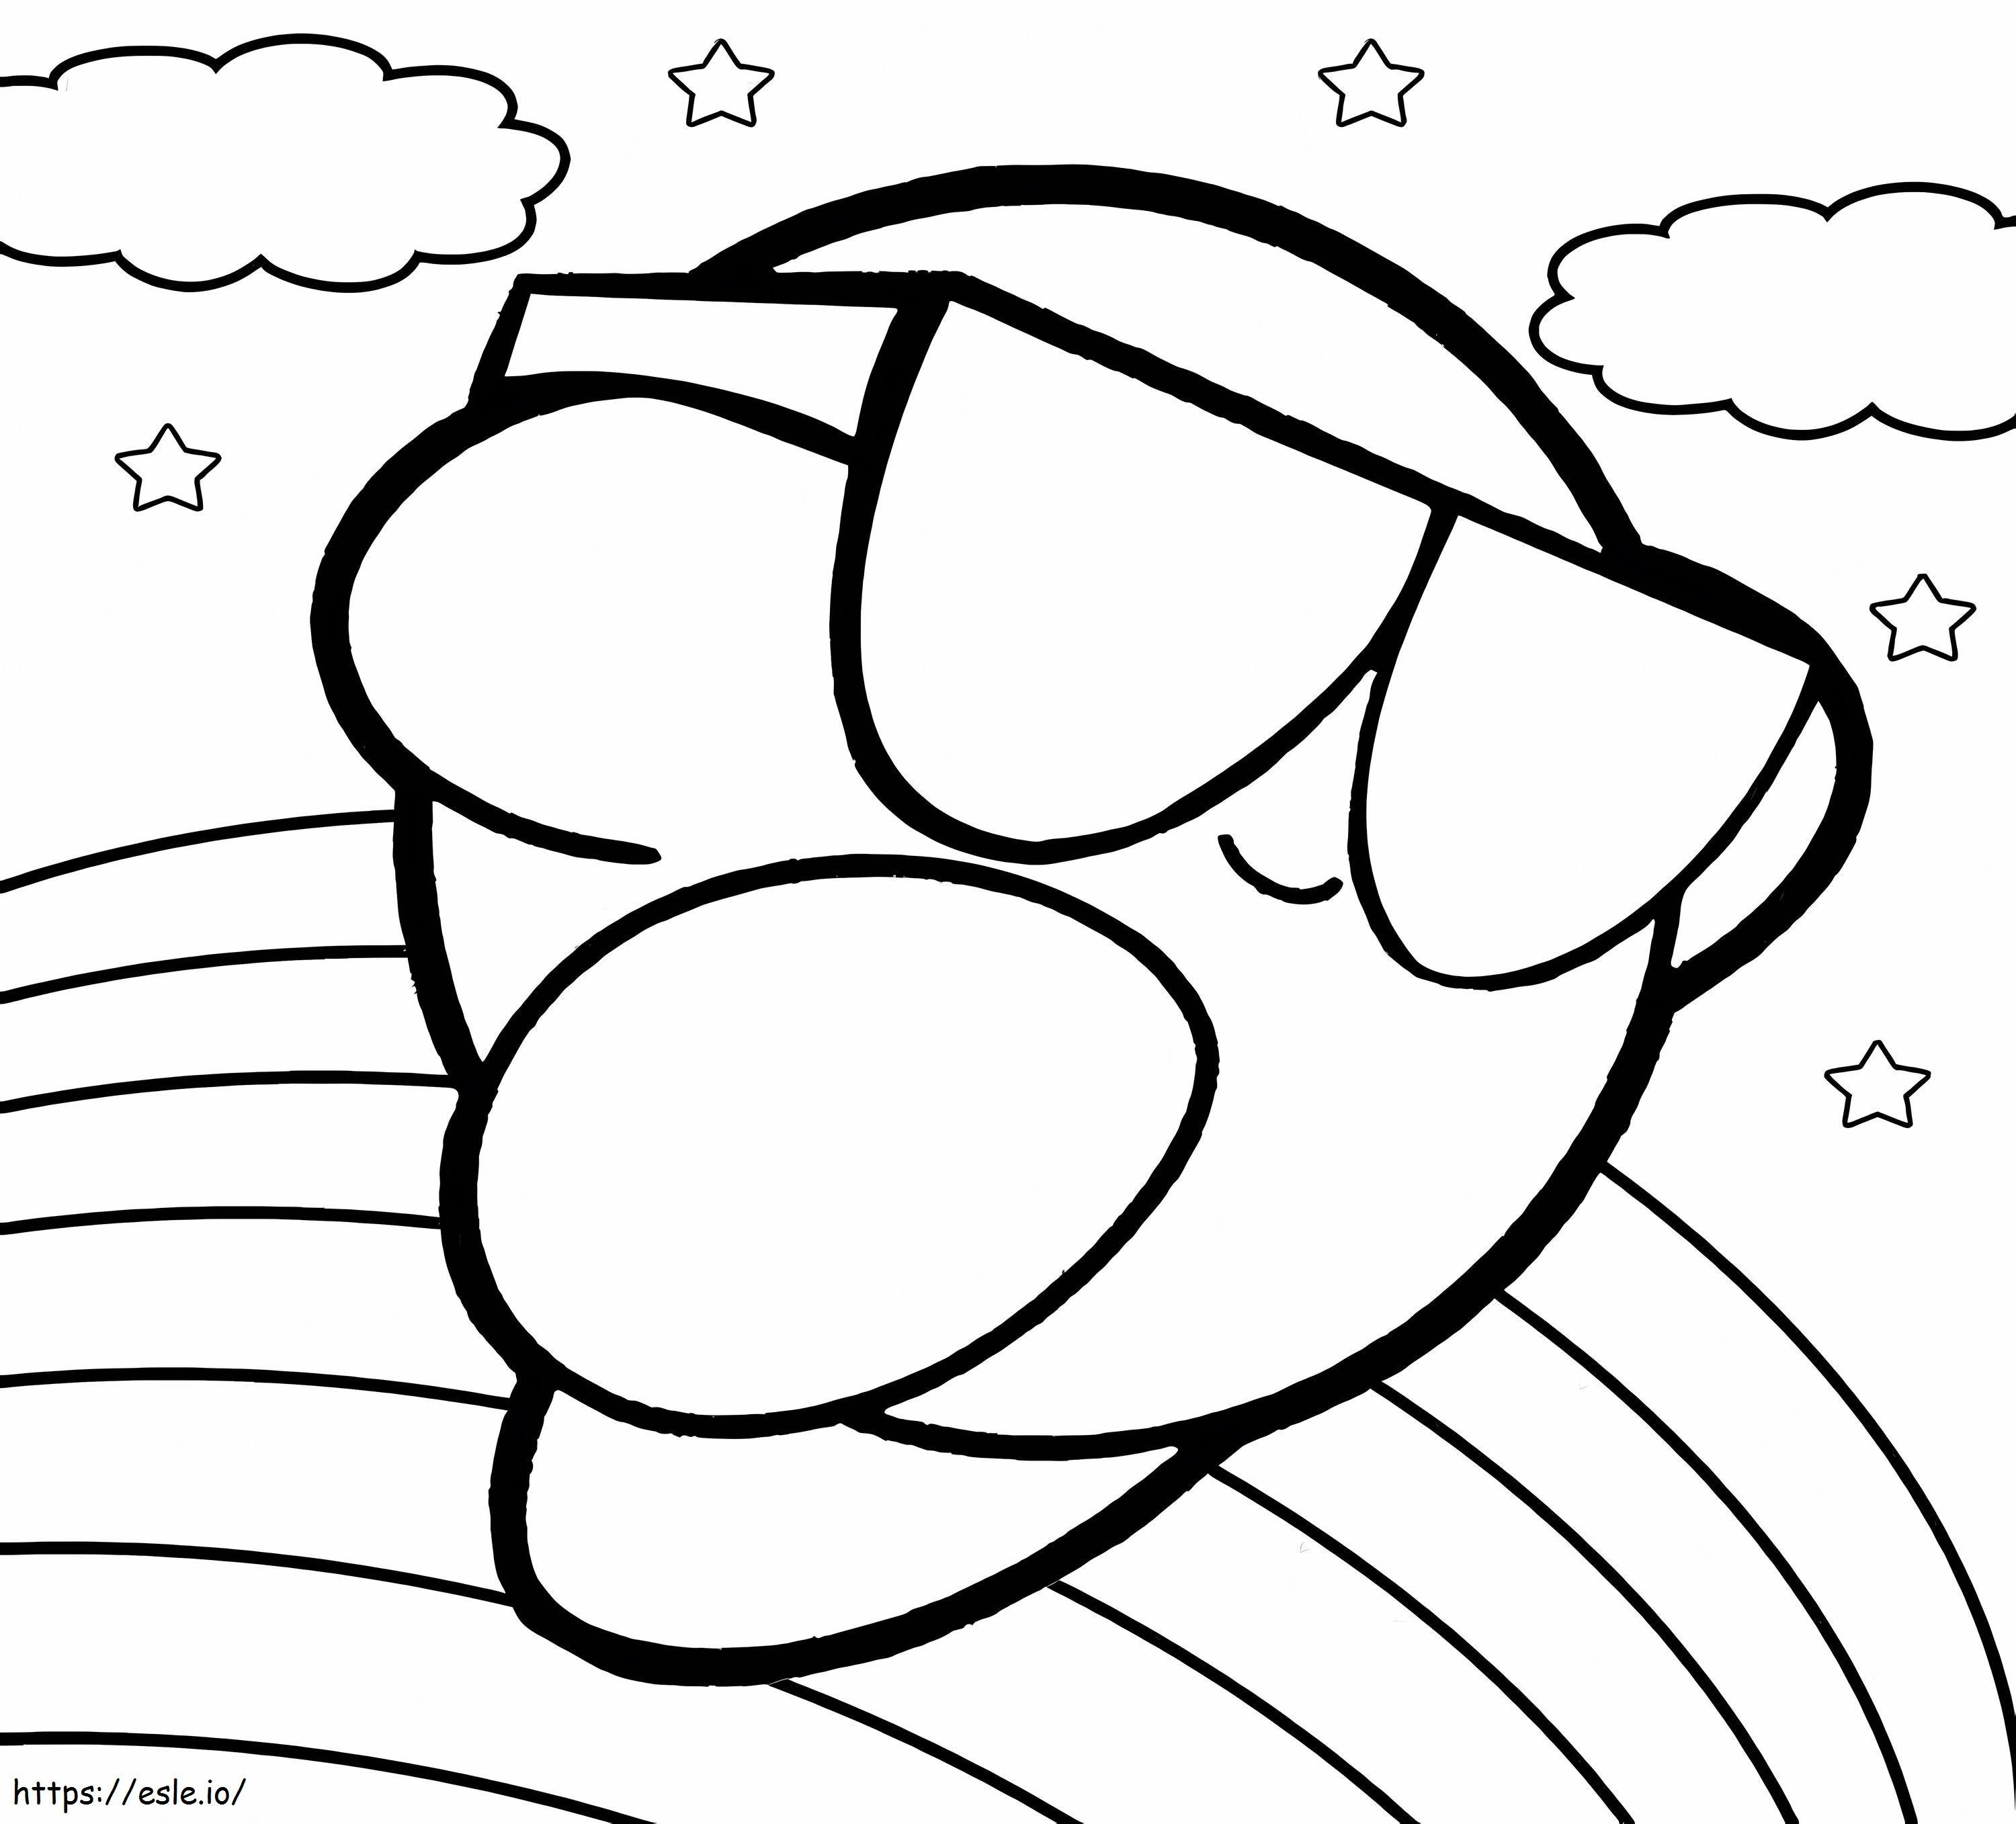 Genial Kirby coloring page